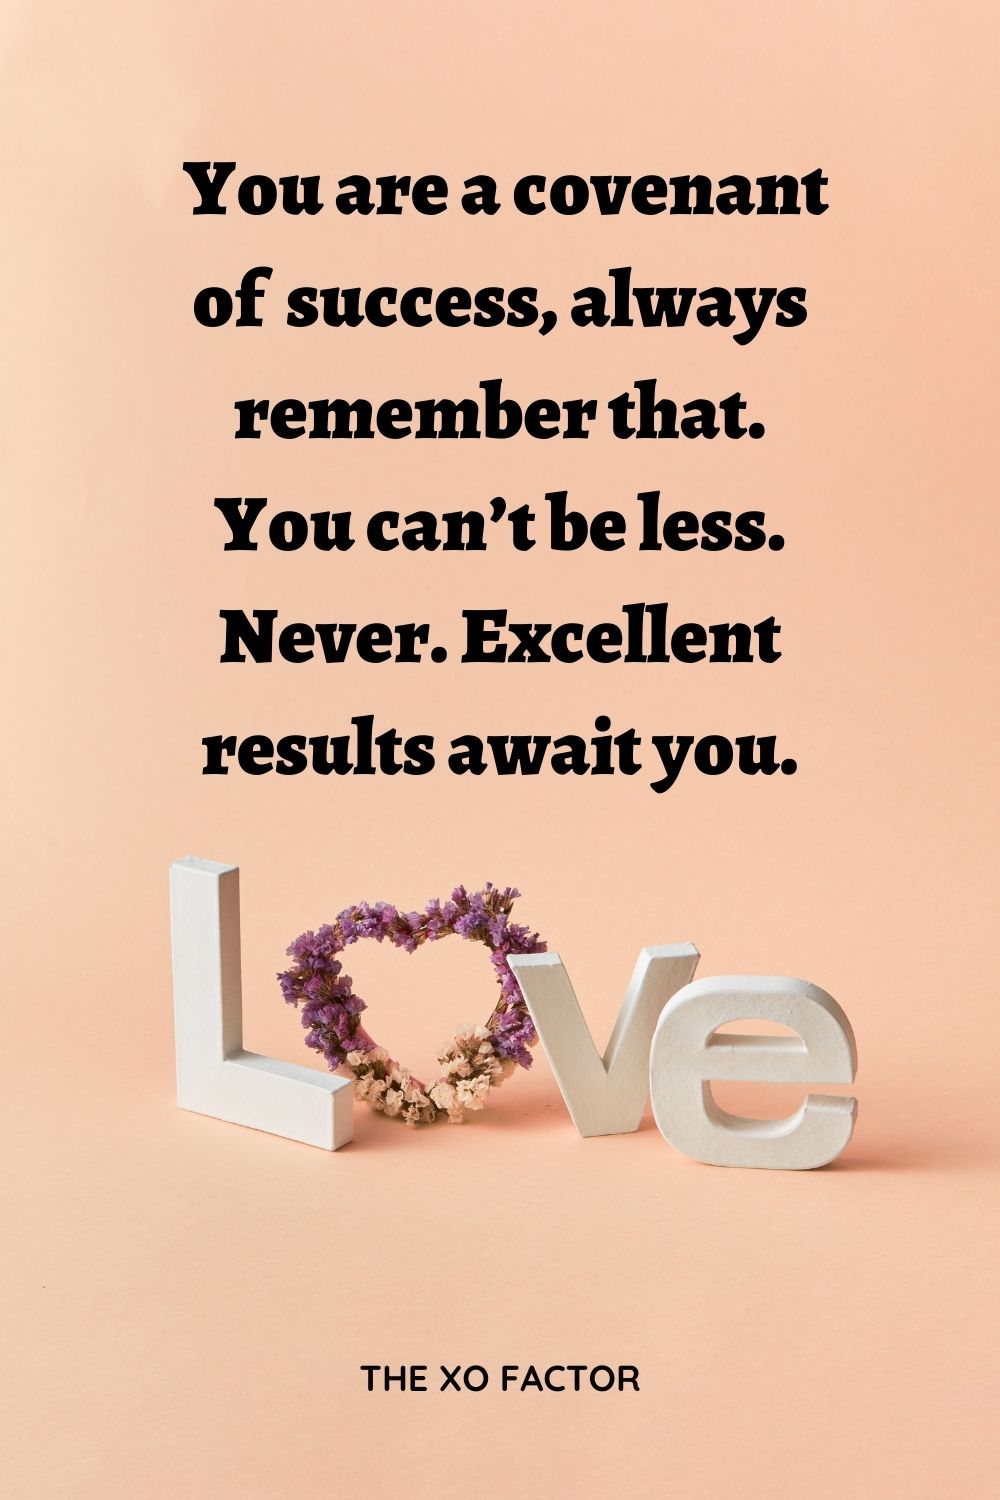  You are a covenant of success, always remember that. You can’t be less. Never. Excellent results await you.